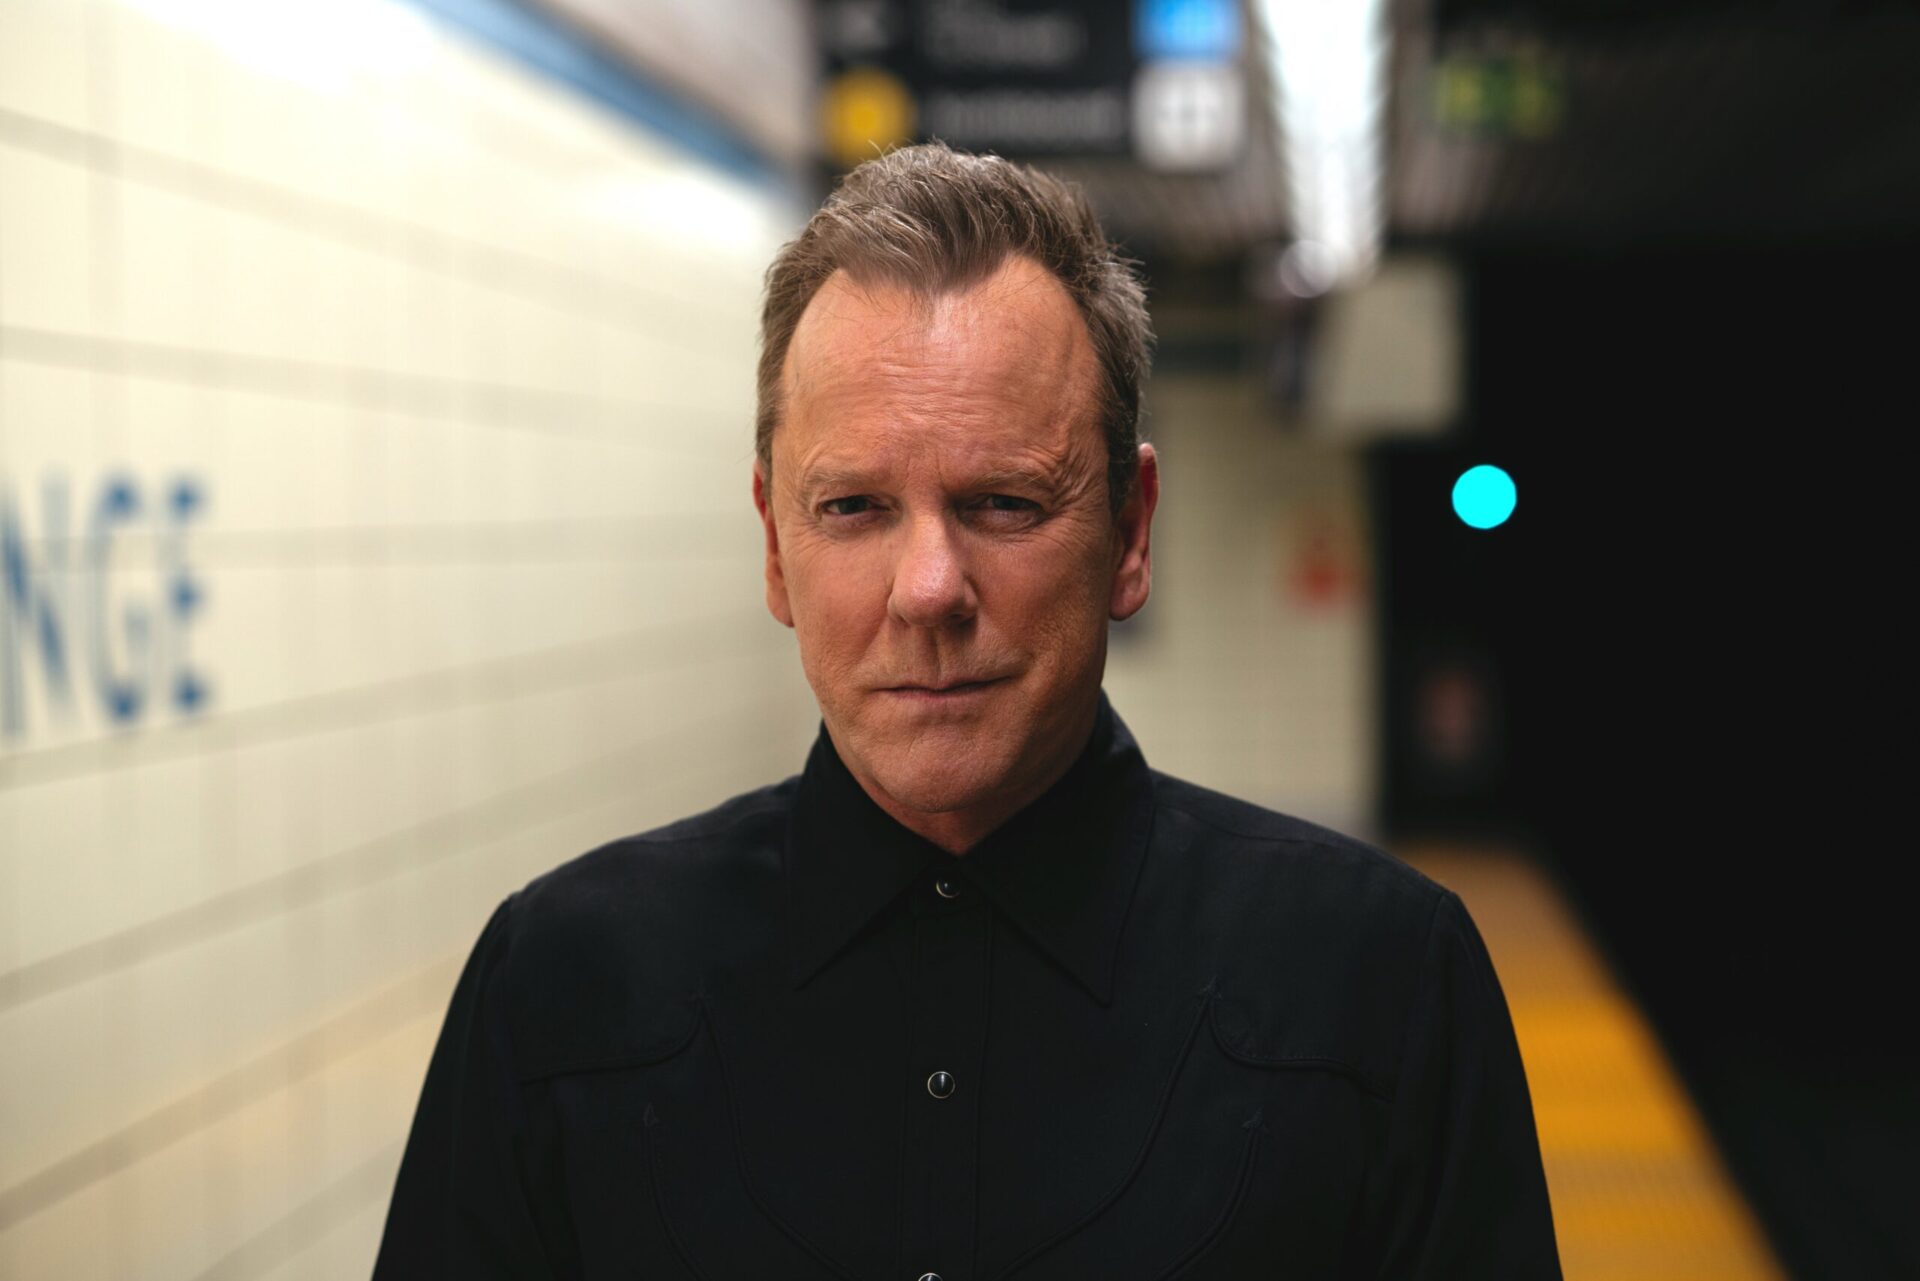 Kiefer Sutherland Biography: Net Worth, Wife, Age, Movies, Parents, TV Shows, Siblings, Instagram, Daughter